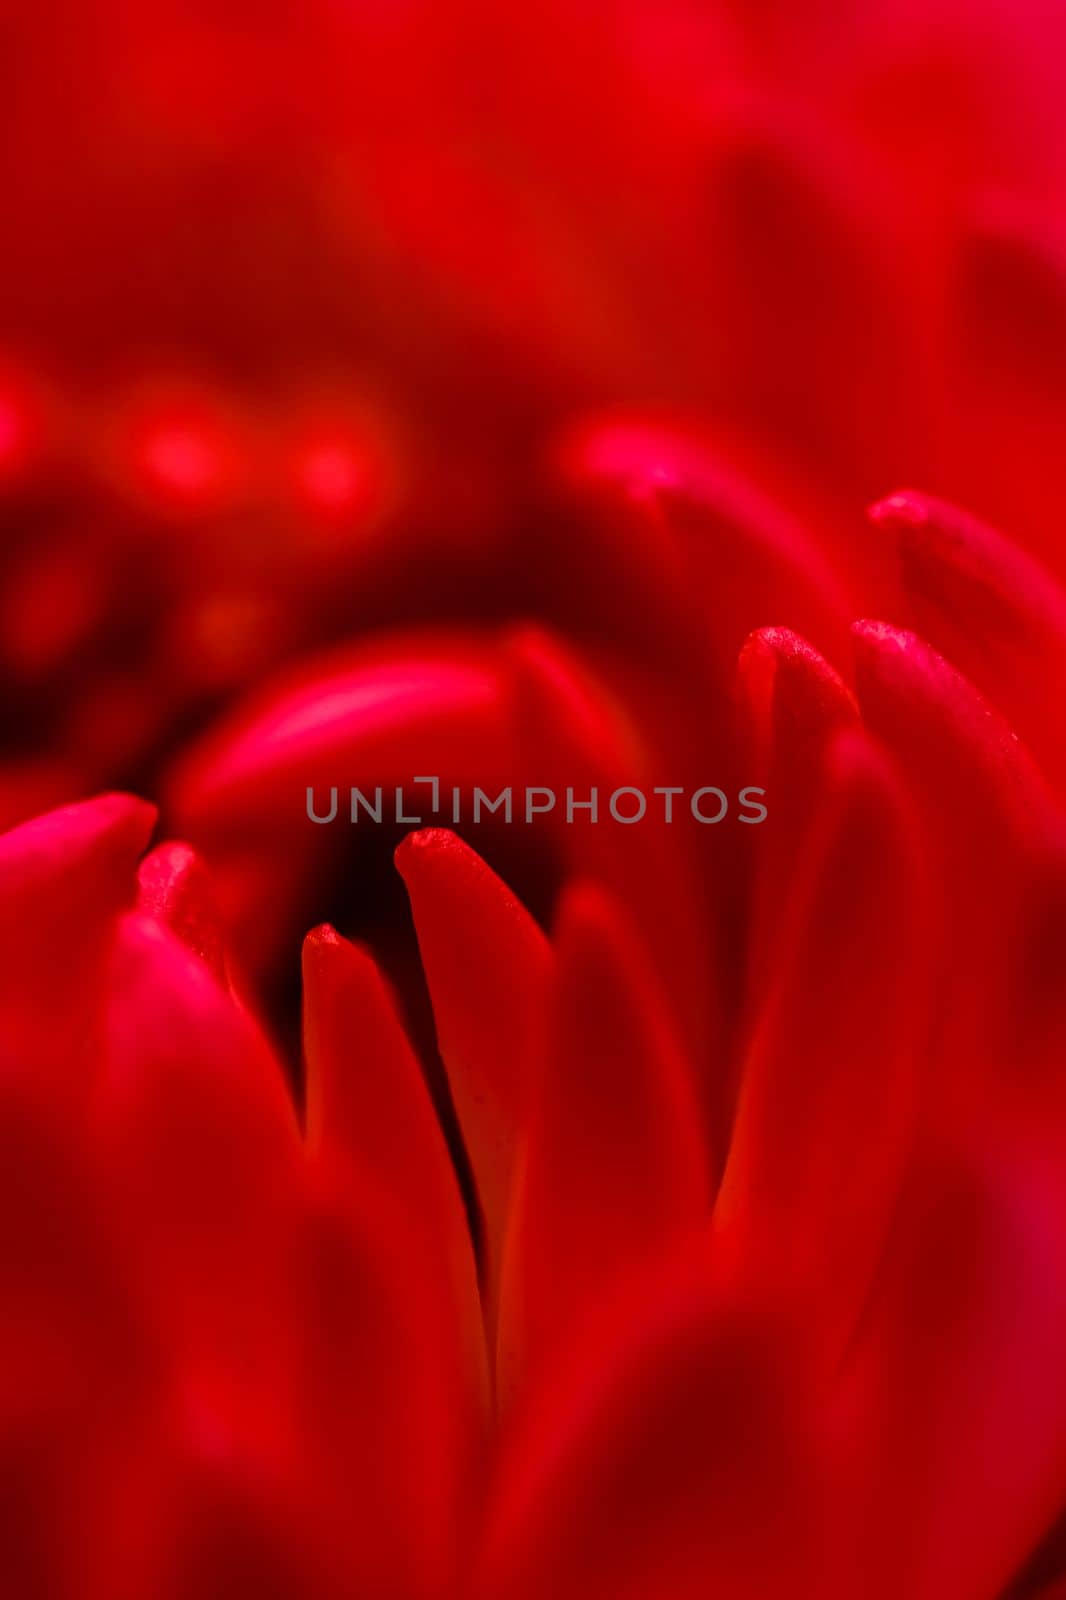 Abstract floral background, red purple chrysanthemum flower petals. Macro flowers backdrop for holiday design. Soft focus